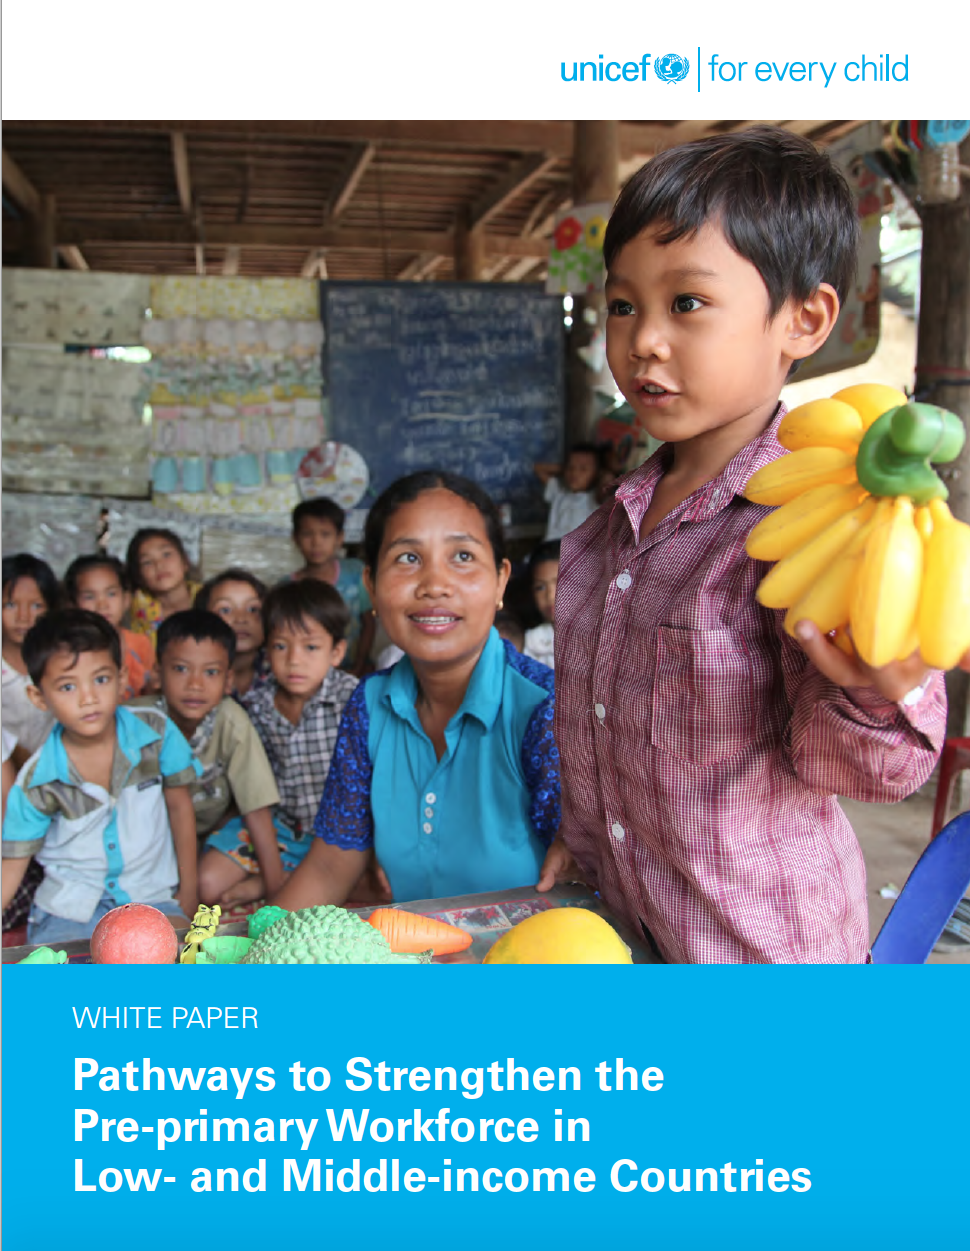 White Paper. Pathways to Strengthen the Pre-primary Workforce in Low- and Middle-income Countries